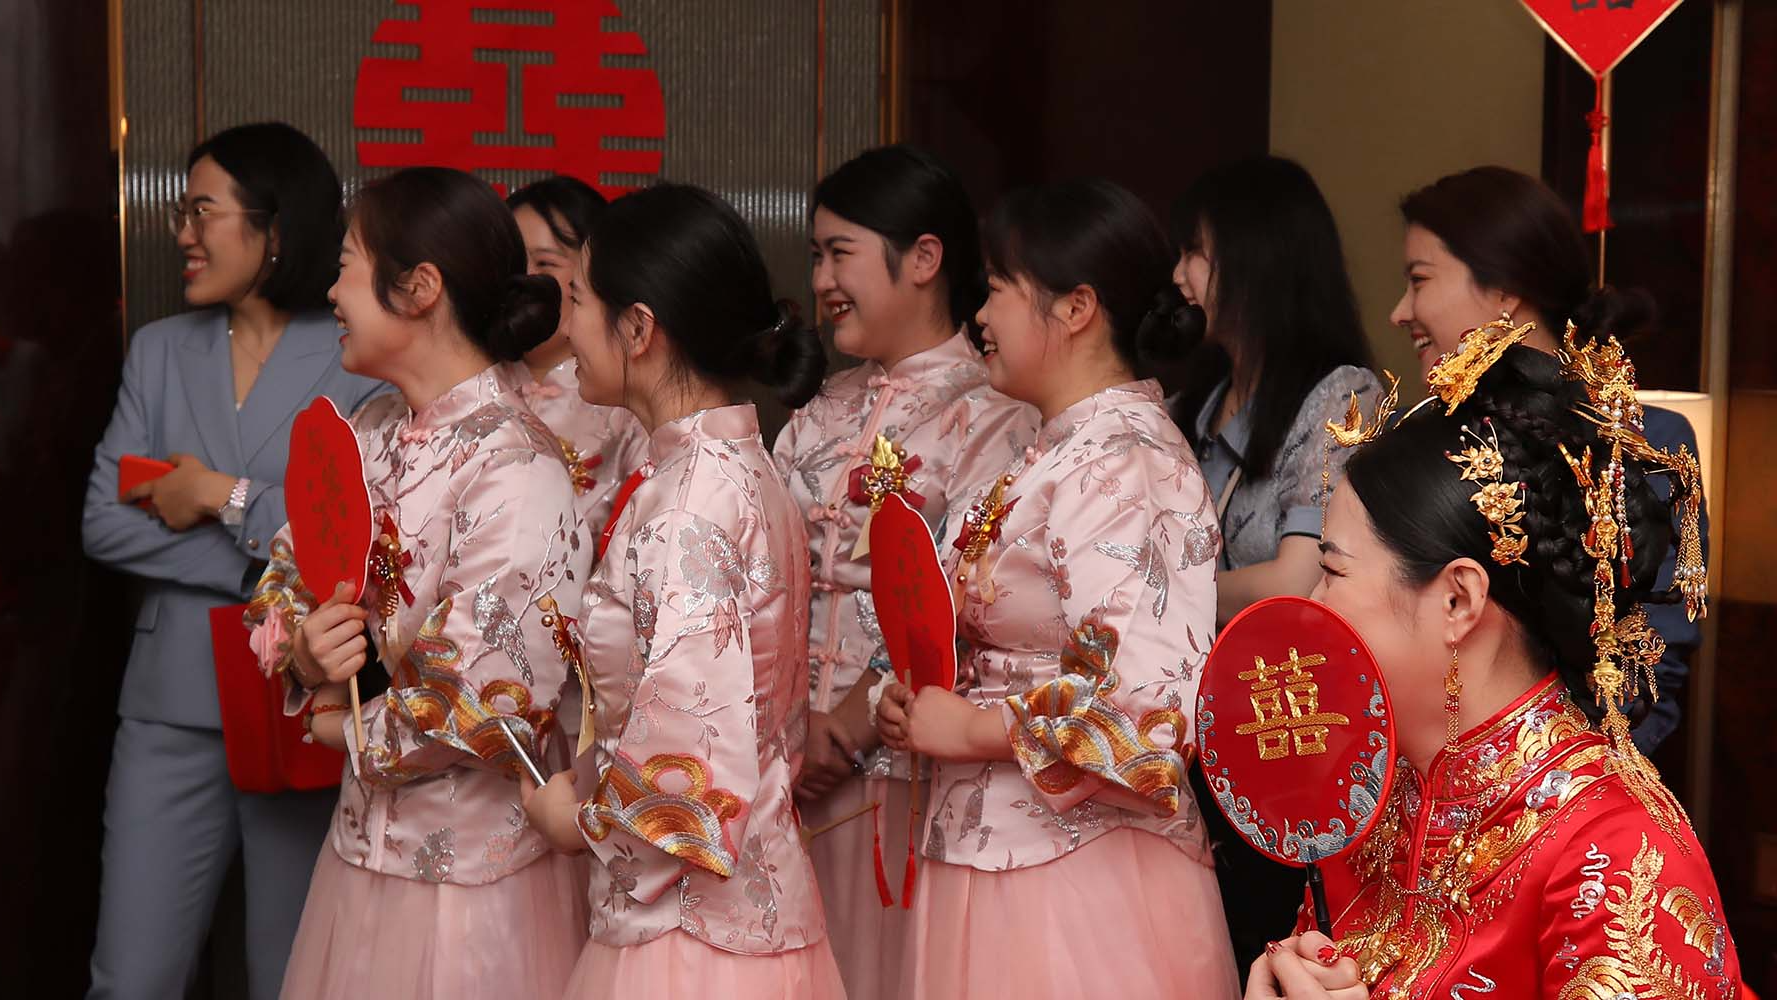 Renting bridesmaids is a fast-growing business in China.